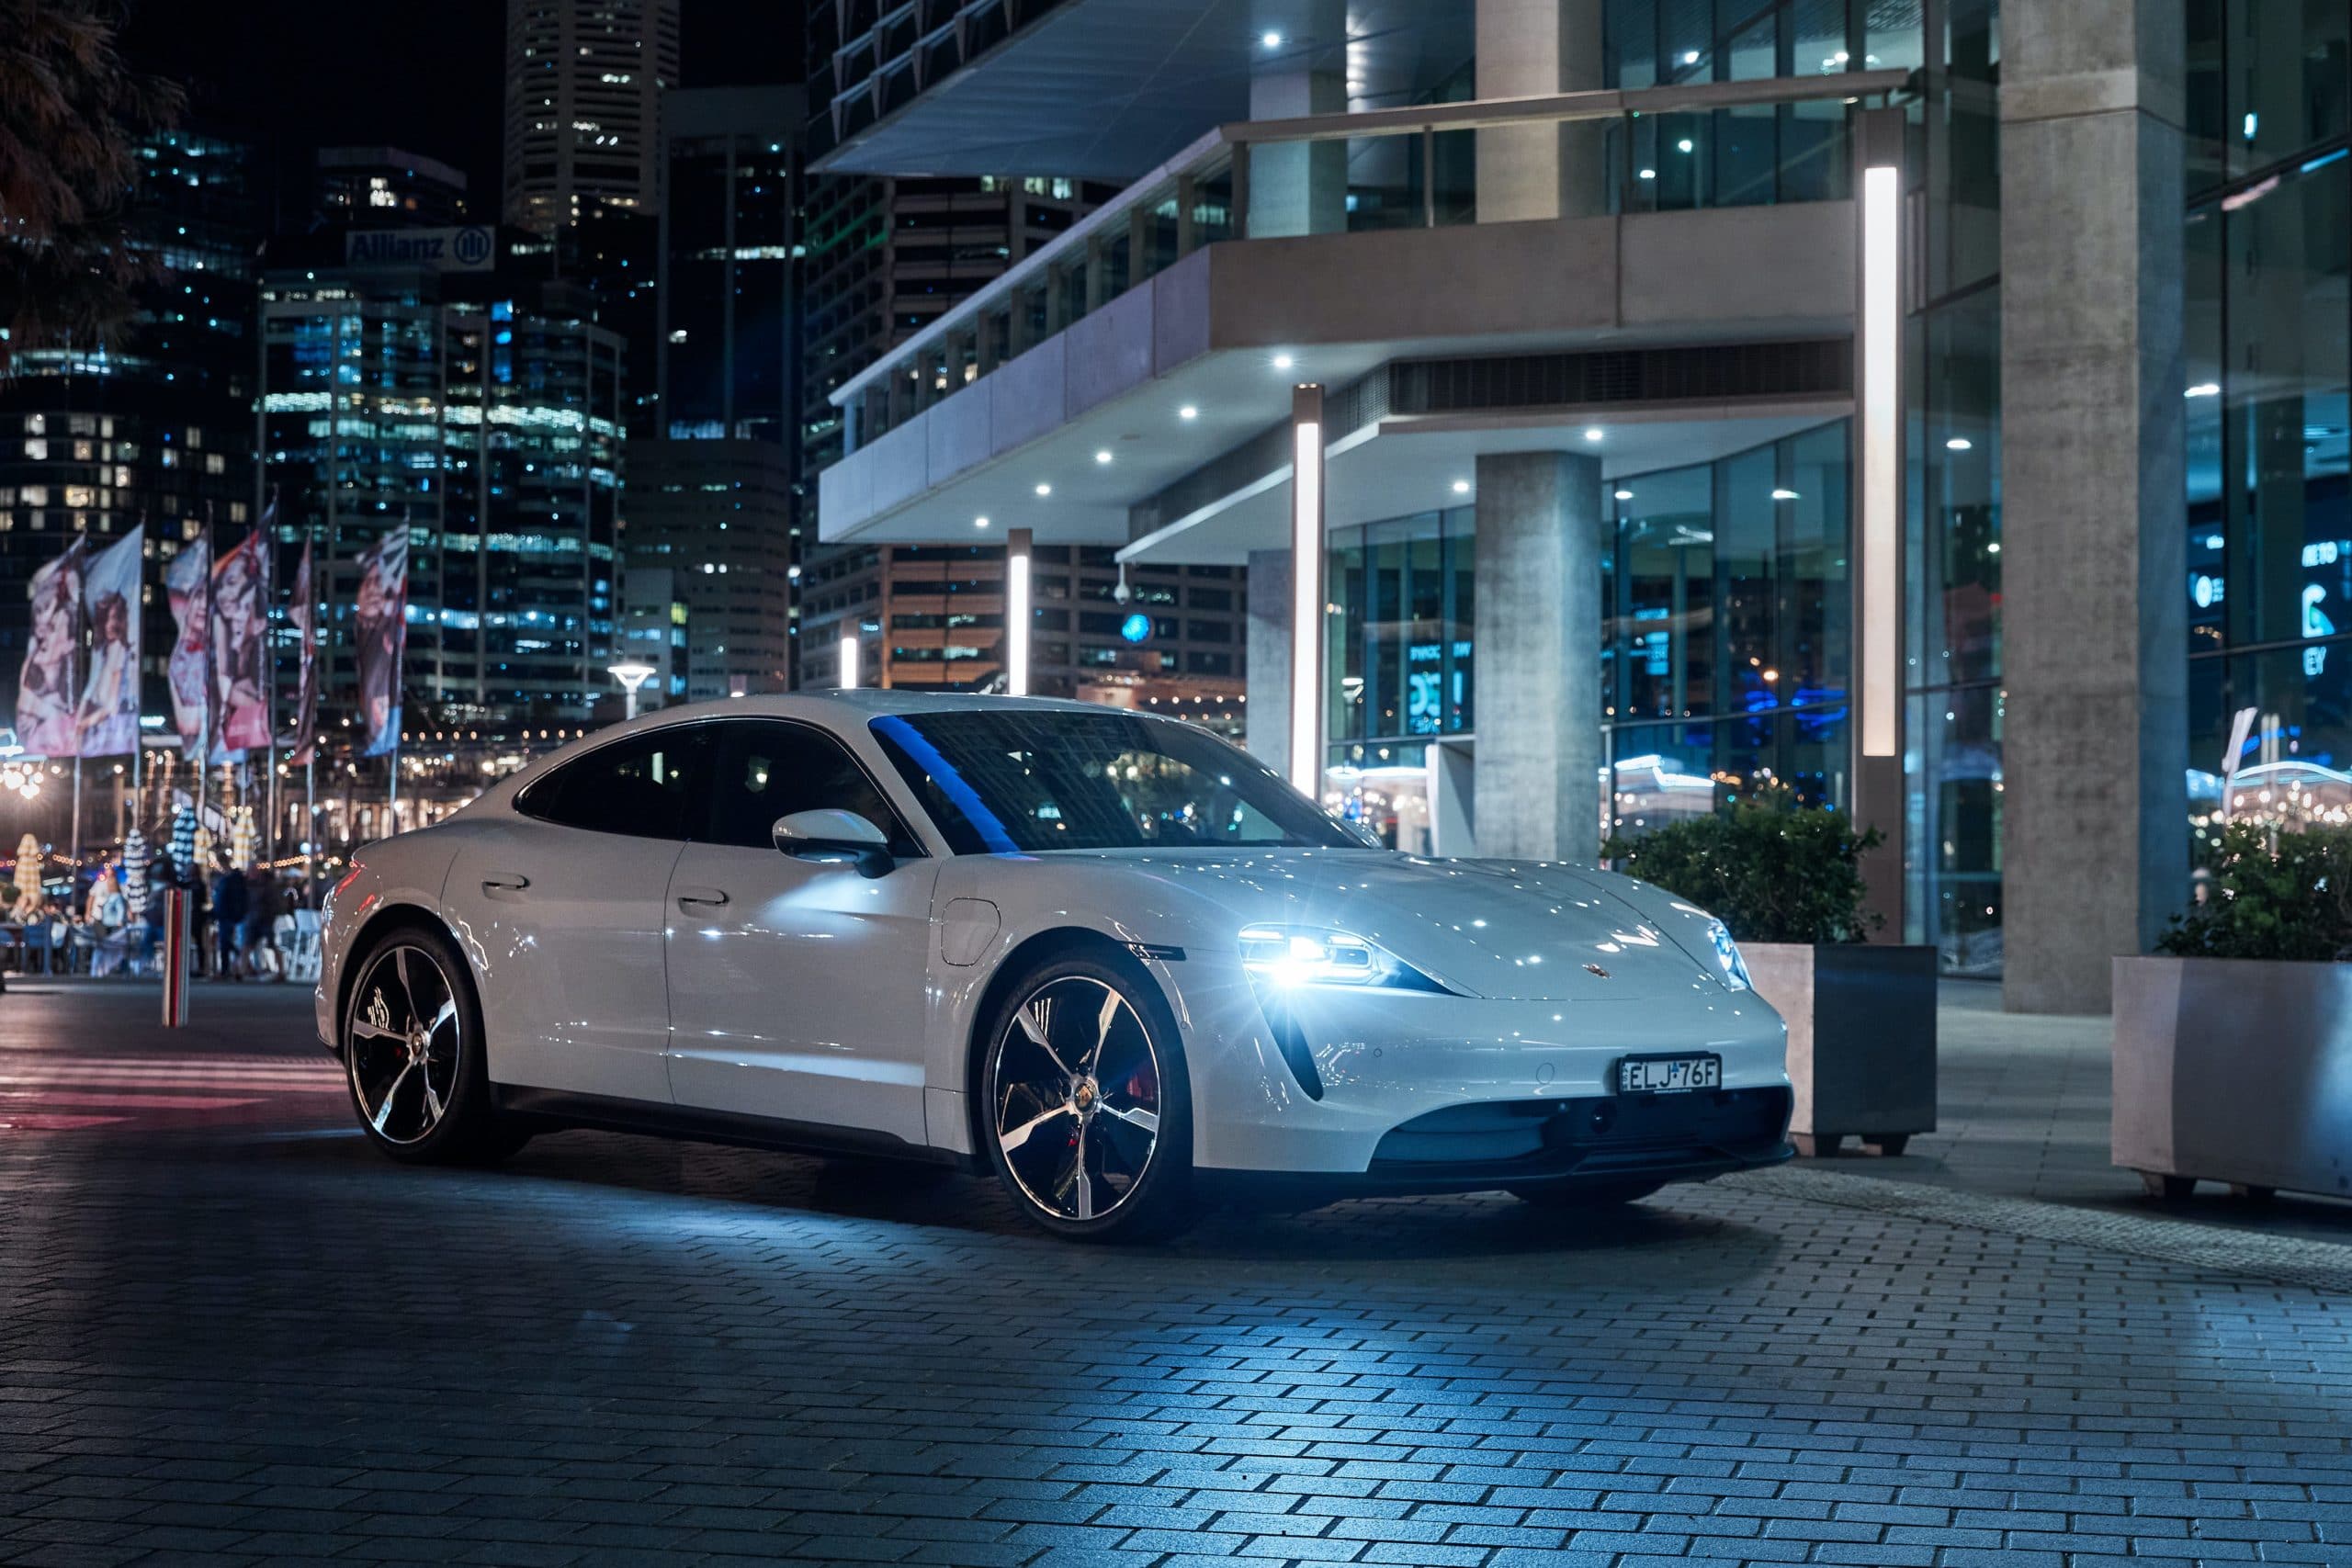 The new Porsche Taycan electrified the soul of Sydney